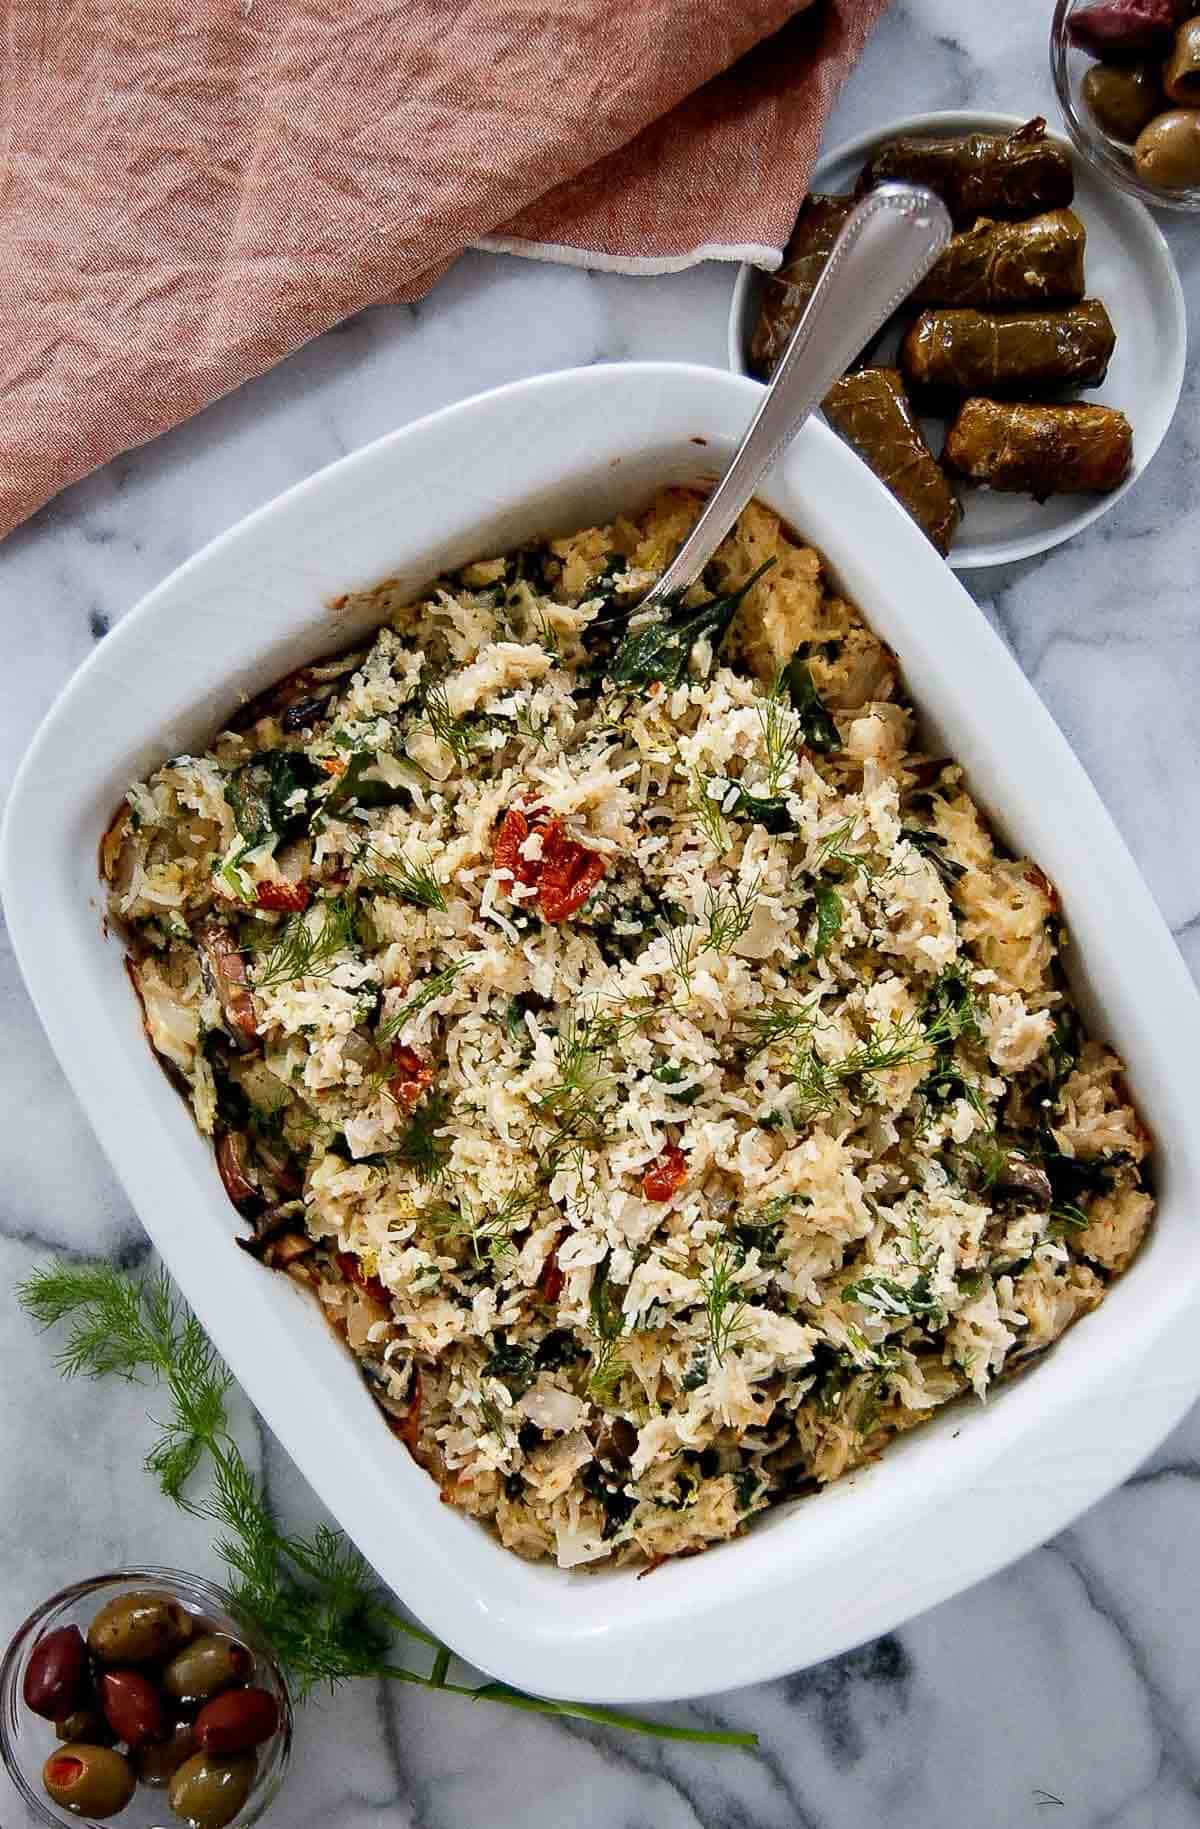 spinach feta and rice casserole in serving dish on counter.